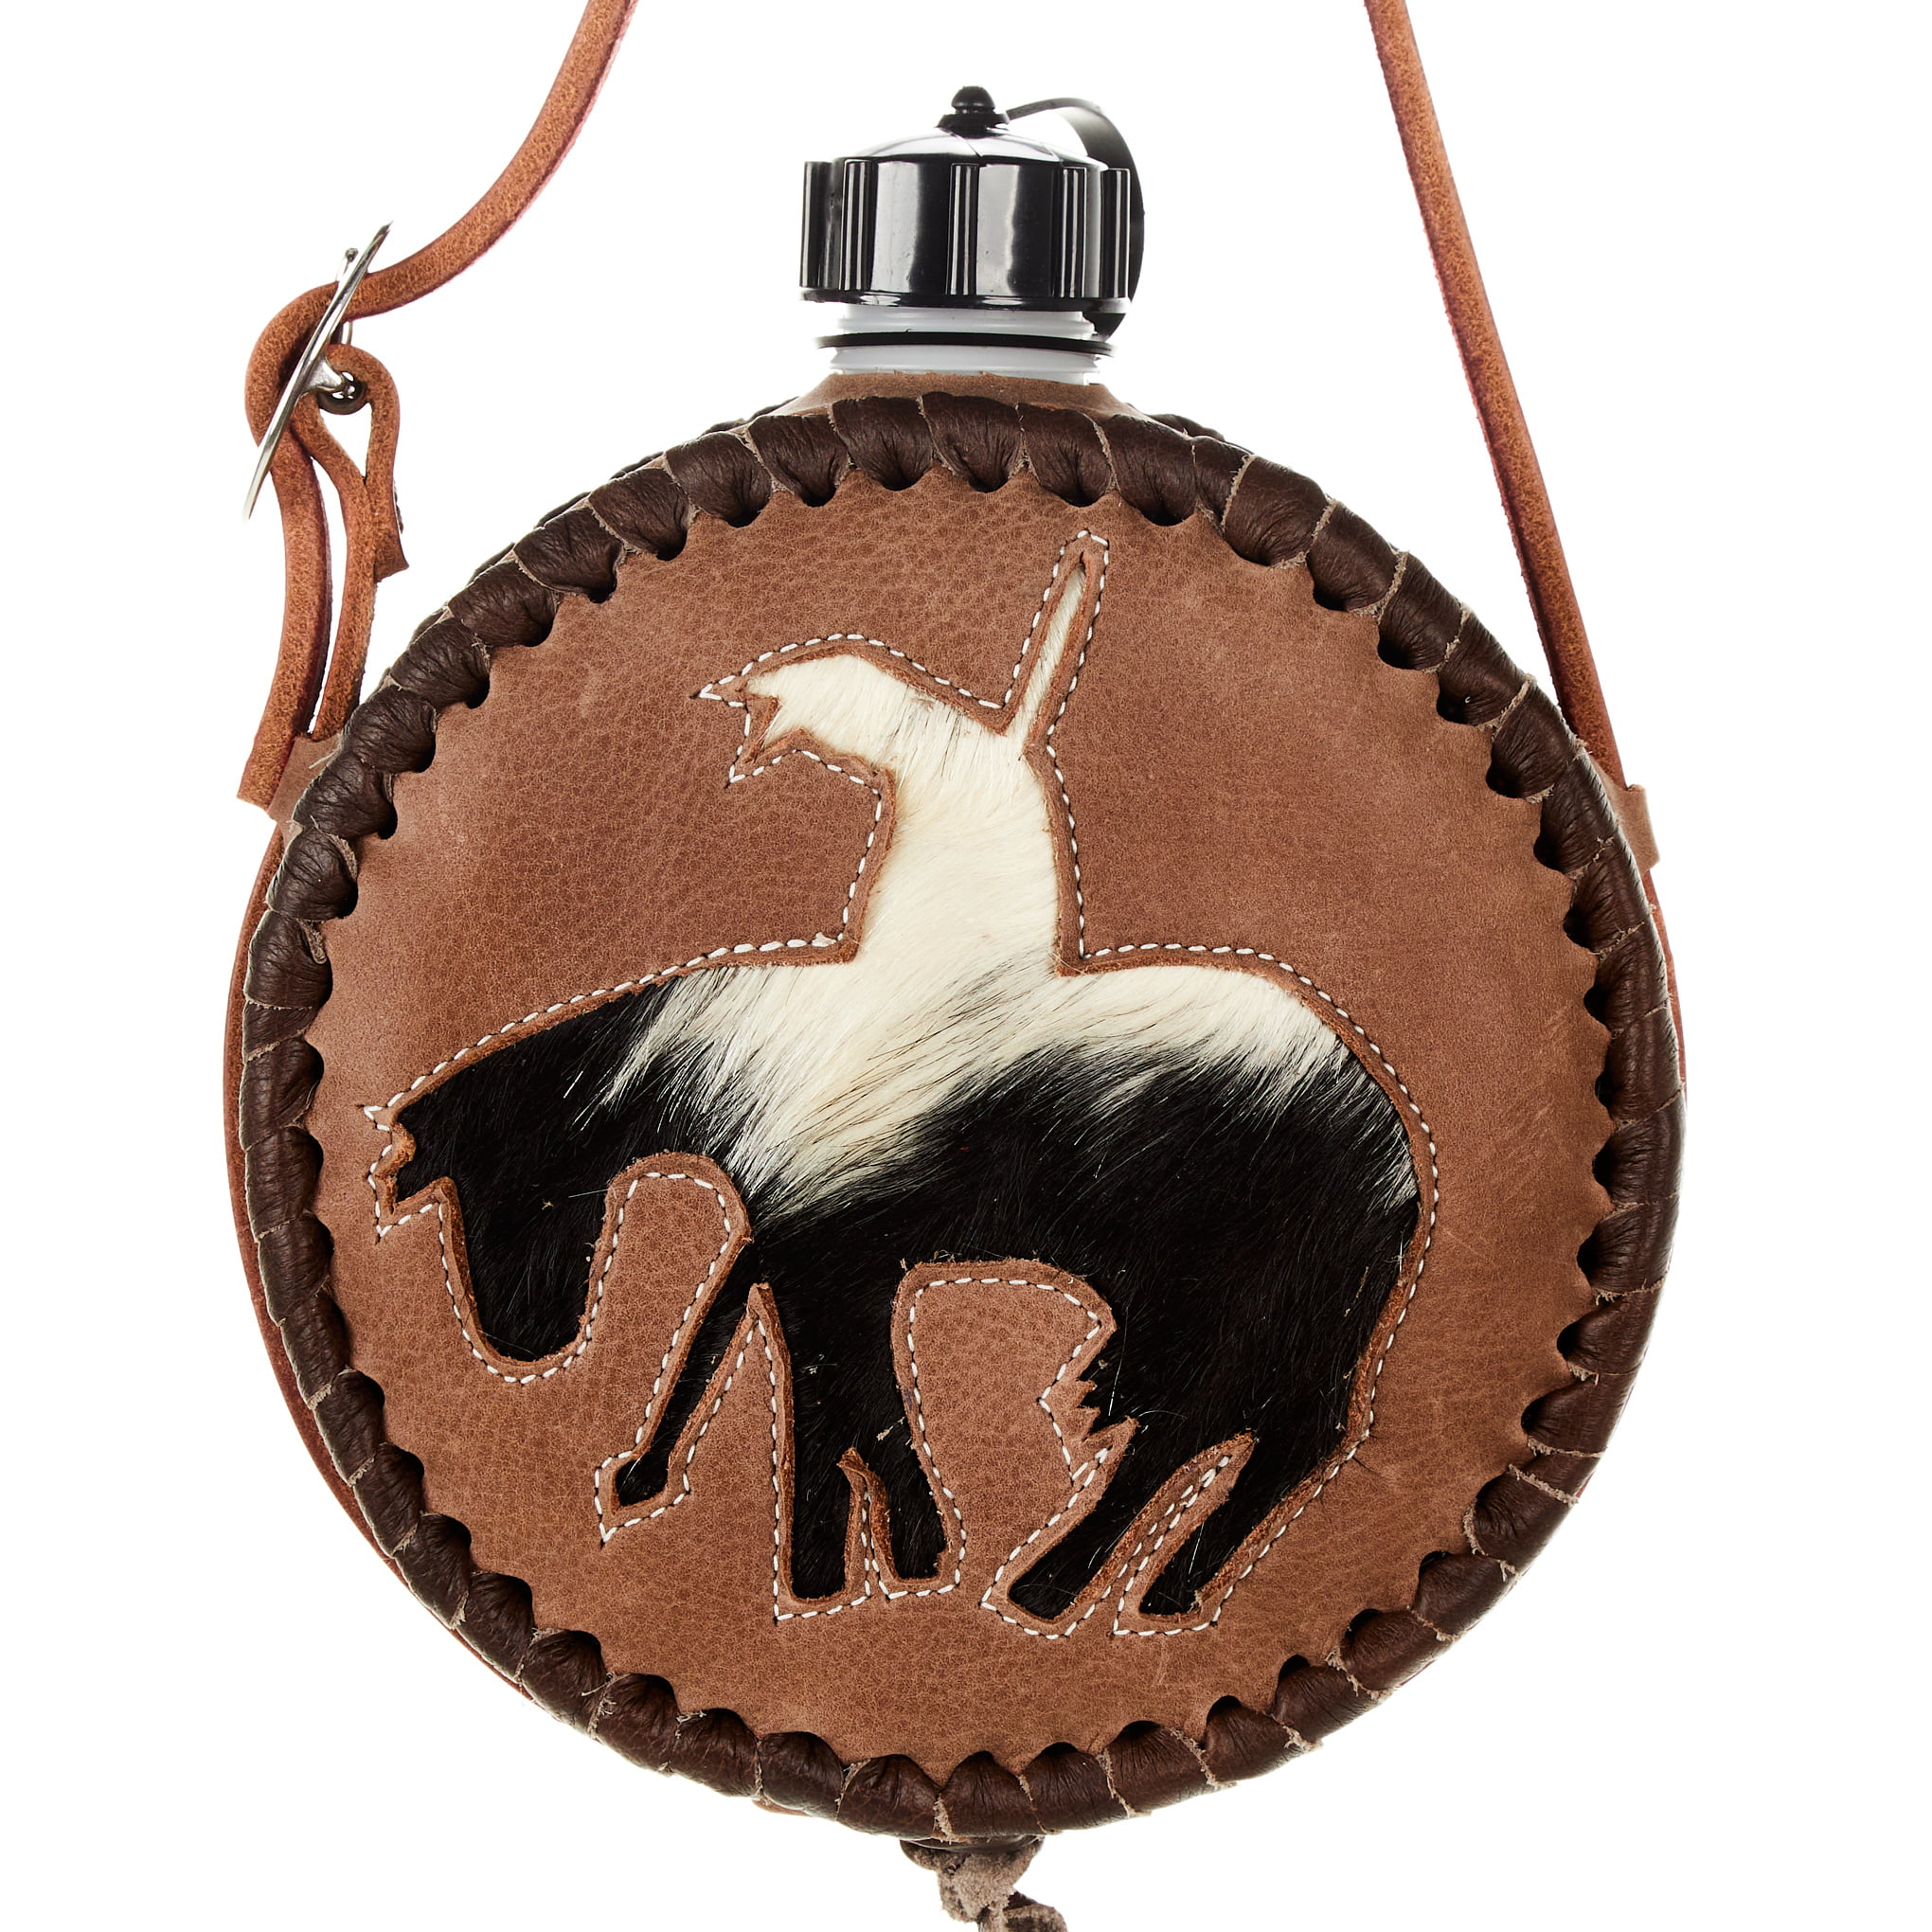 Rockin` Y Saddlery Leather-Covered Canteen with Inlay Endoftrail